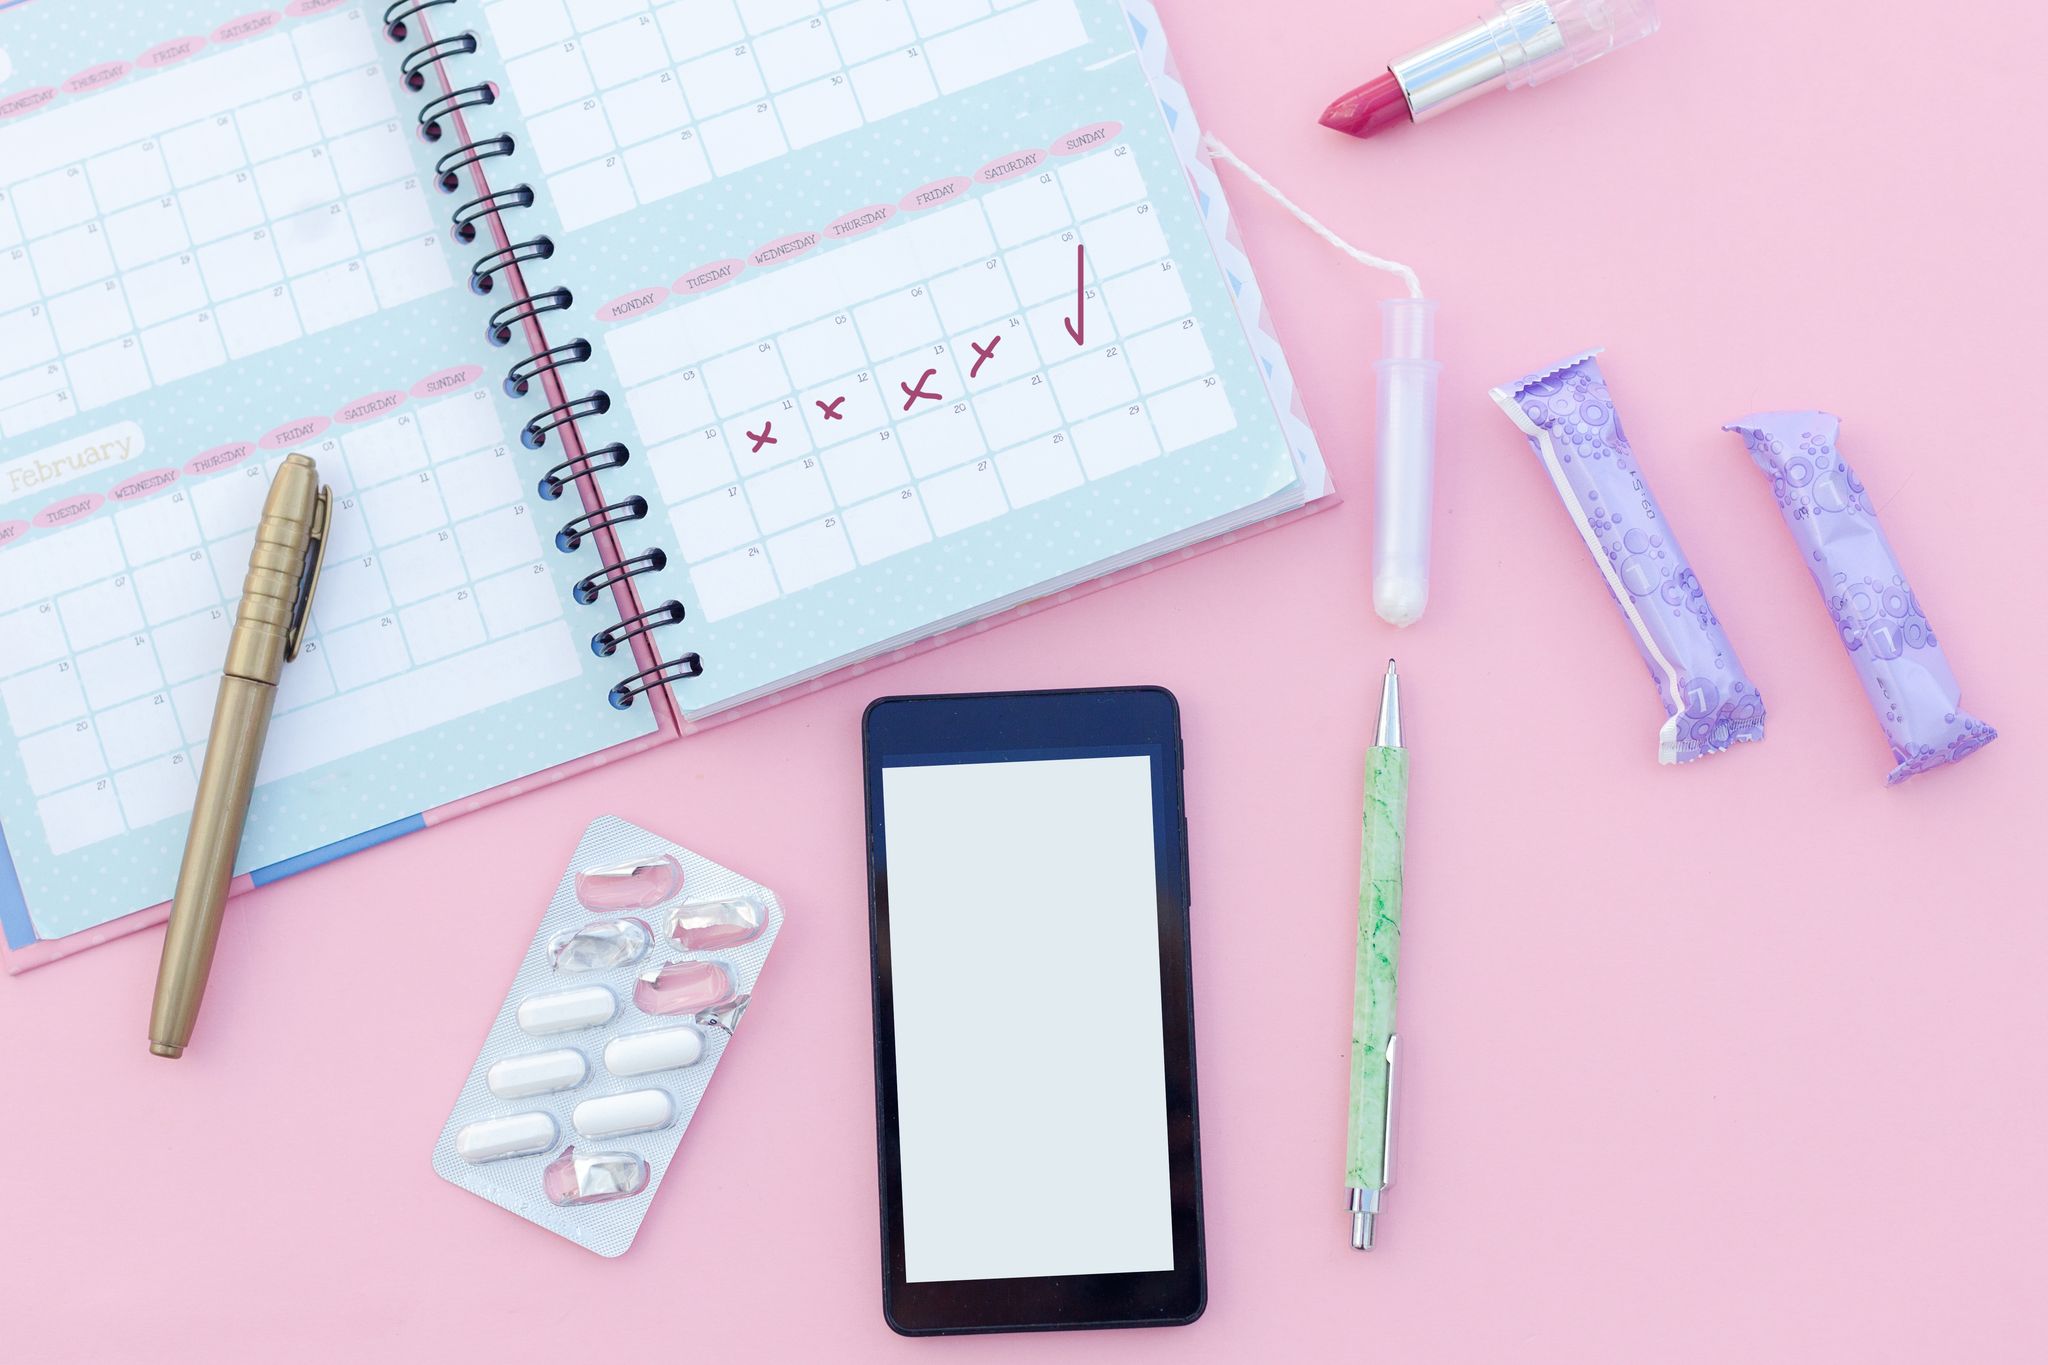 Period coaching - does it work in real life - Women's Health UK 